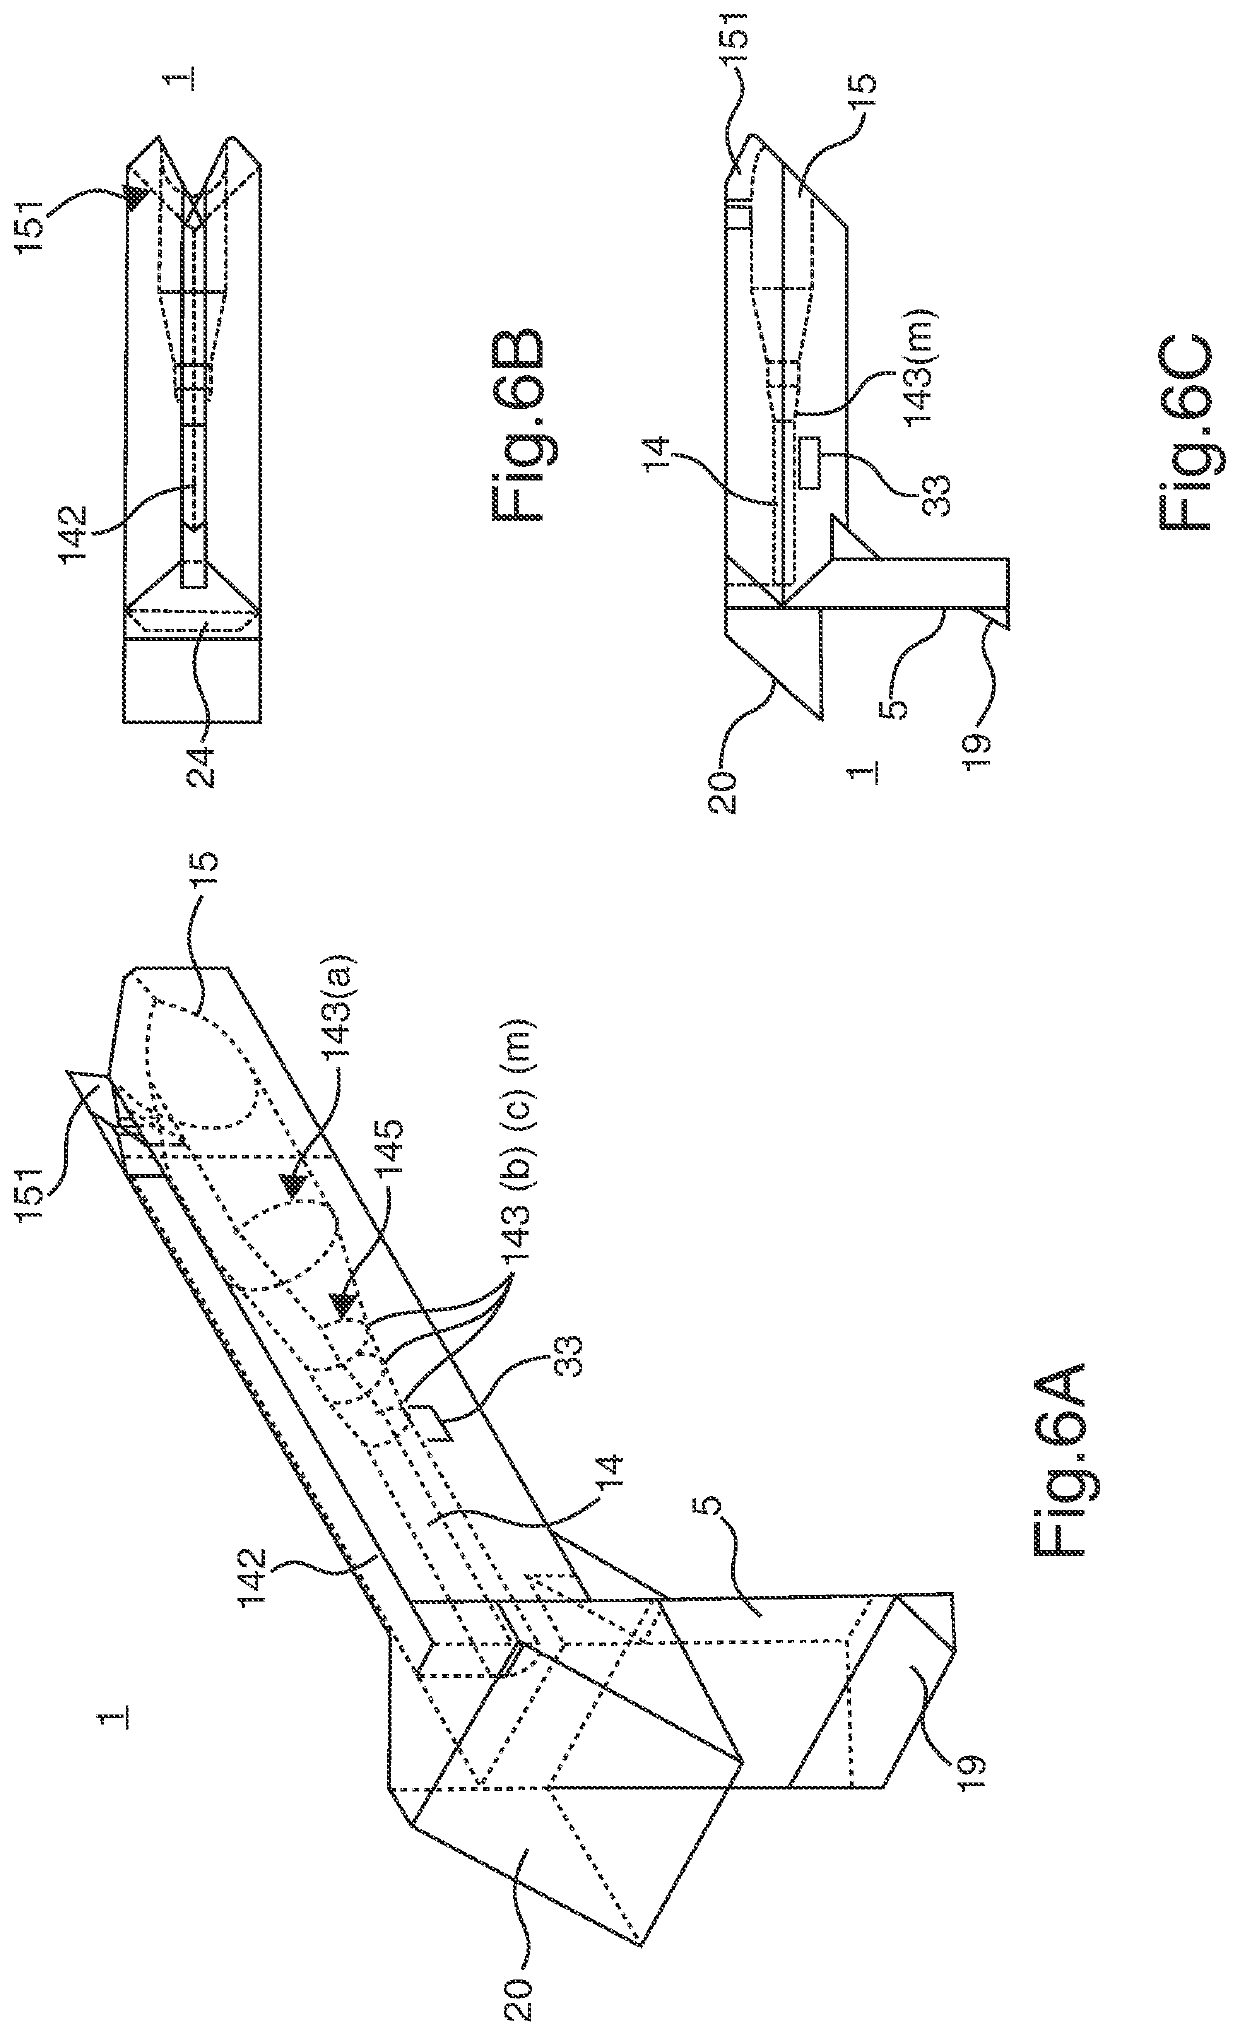 System for Ensuring Failsafe Operation of Pitot Tube Covers for Multiple Types of Pitot Tubes